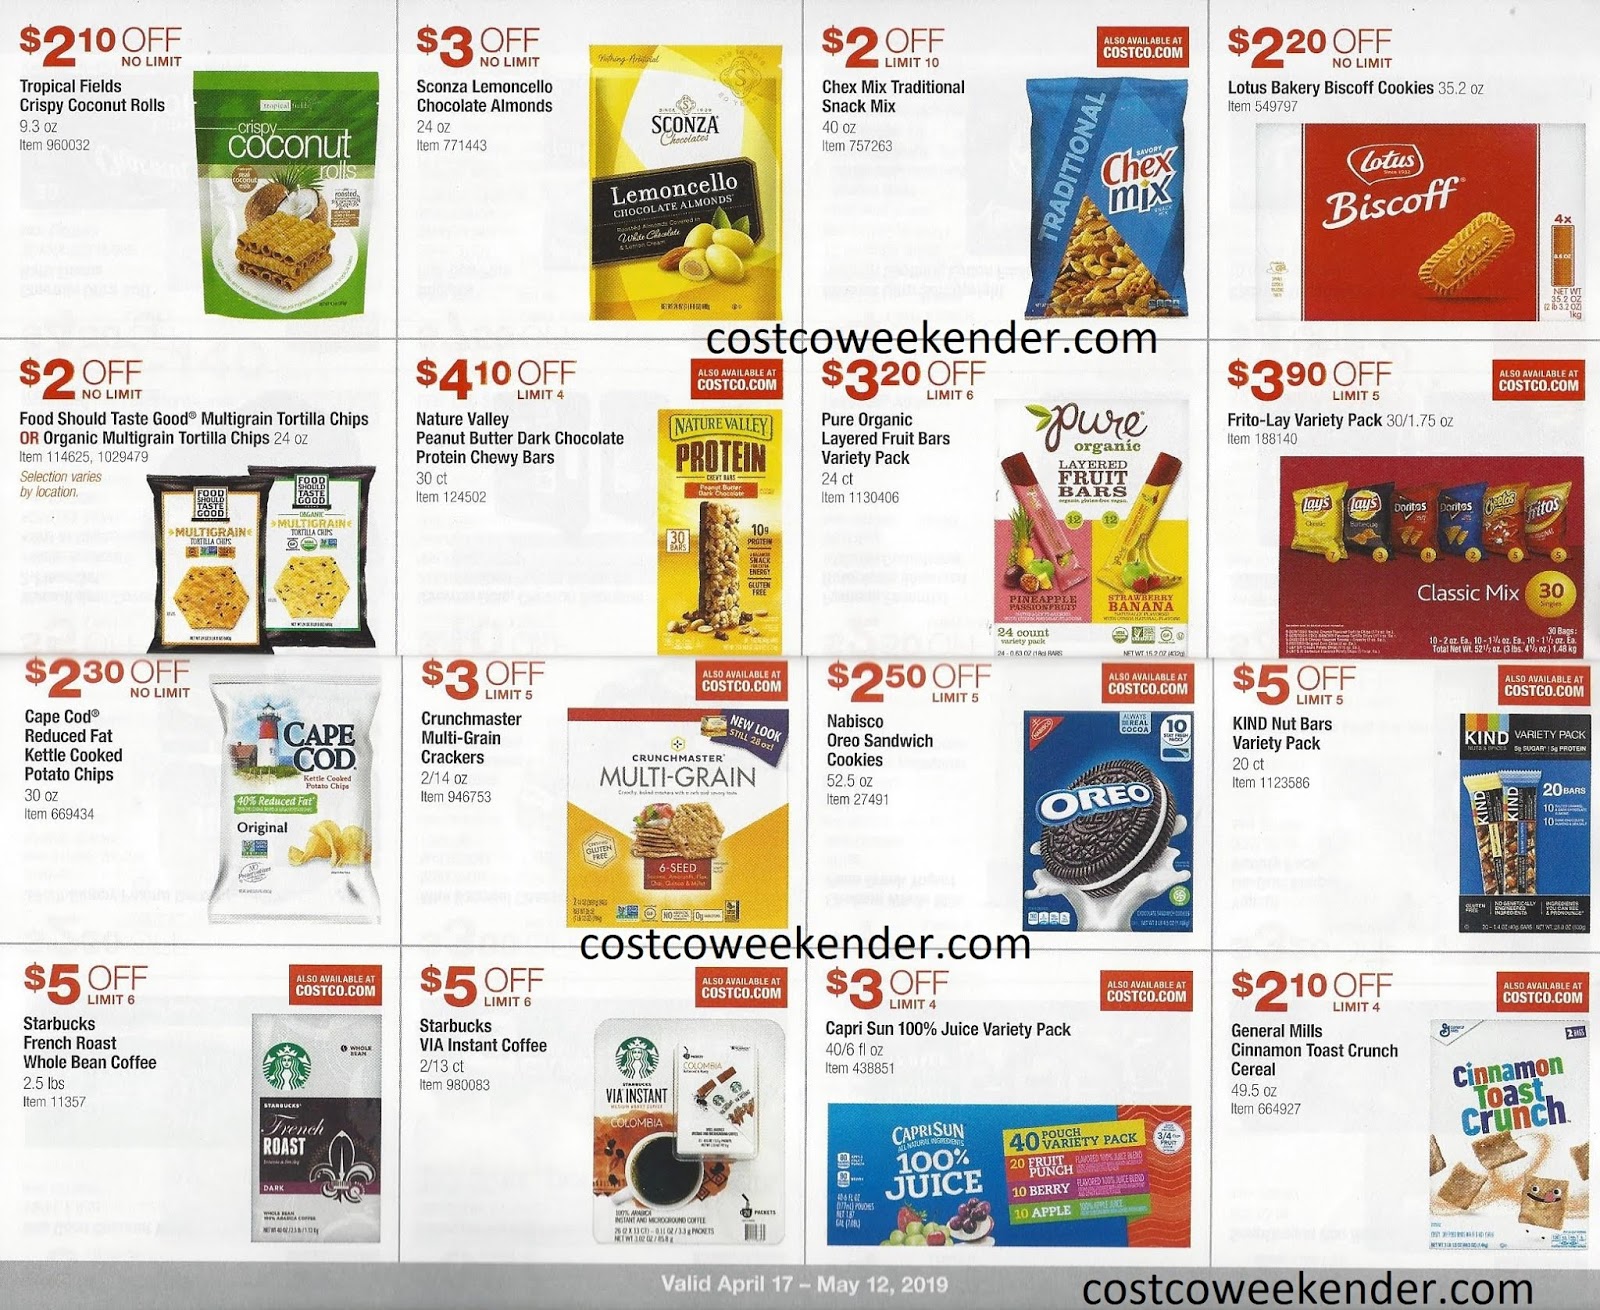 4. "Costco Coupon Book" - A section on the Costco website where members can find current discounts and coupons - wide 1